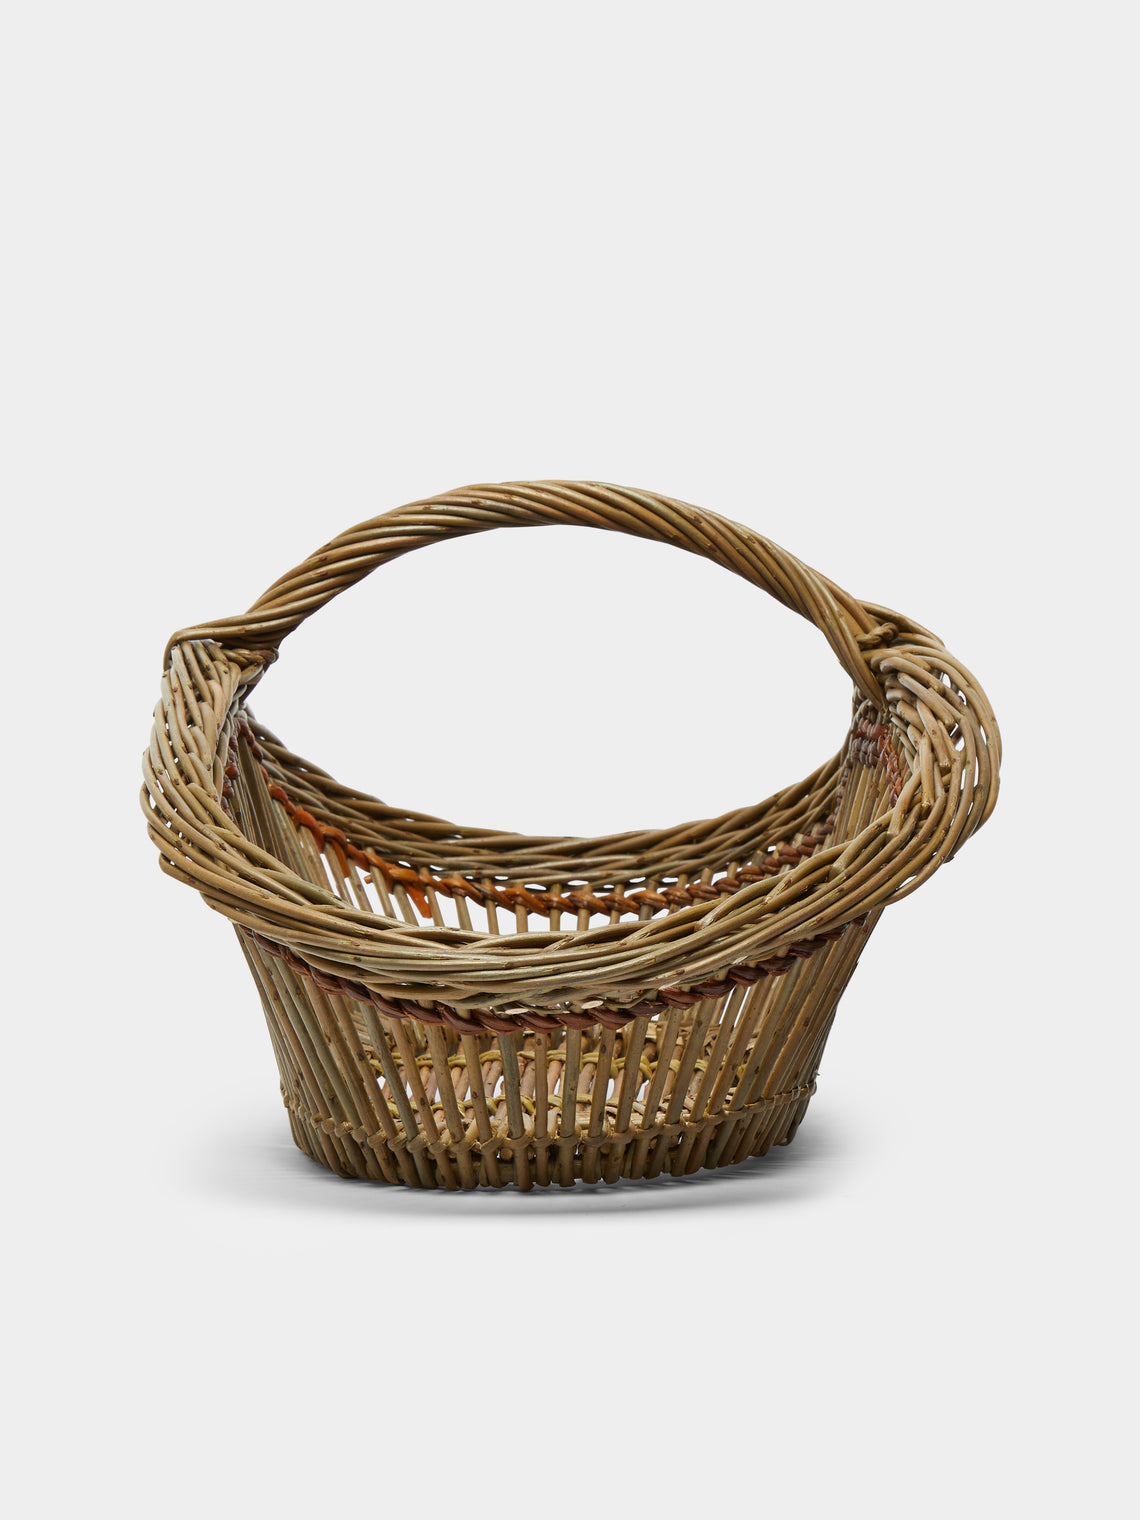 Benjamin Nauleau - Handwoven Willow Fitched Gathering Basket -  - ABASK